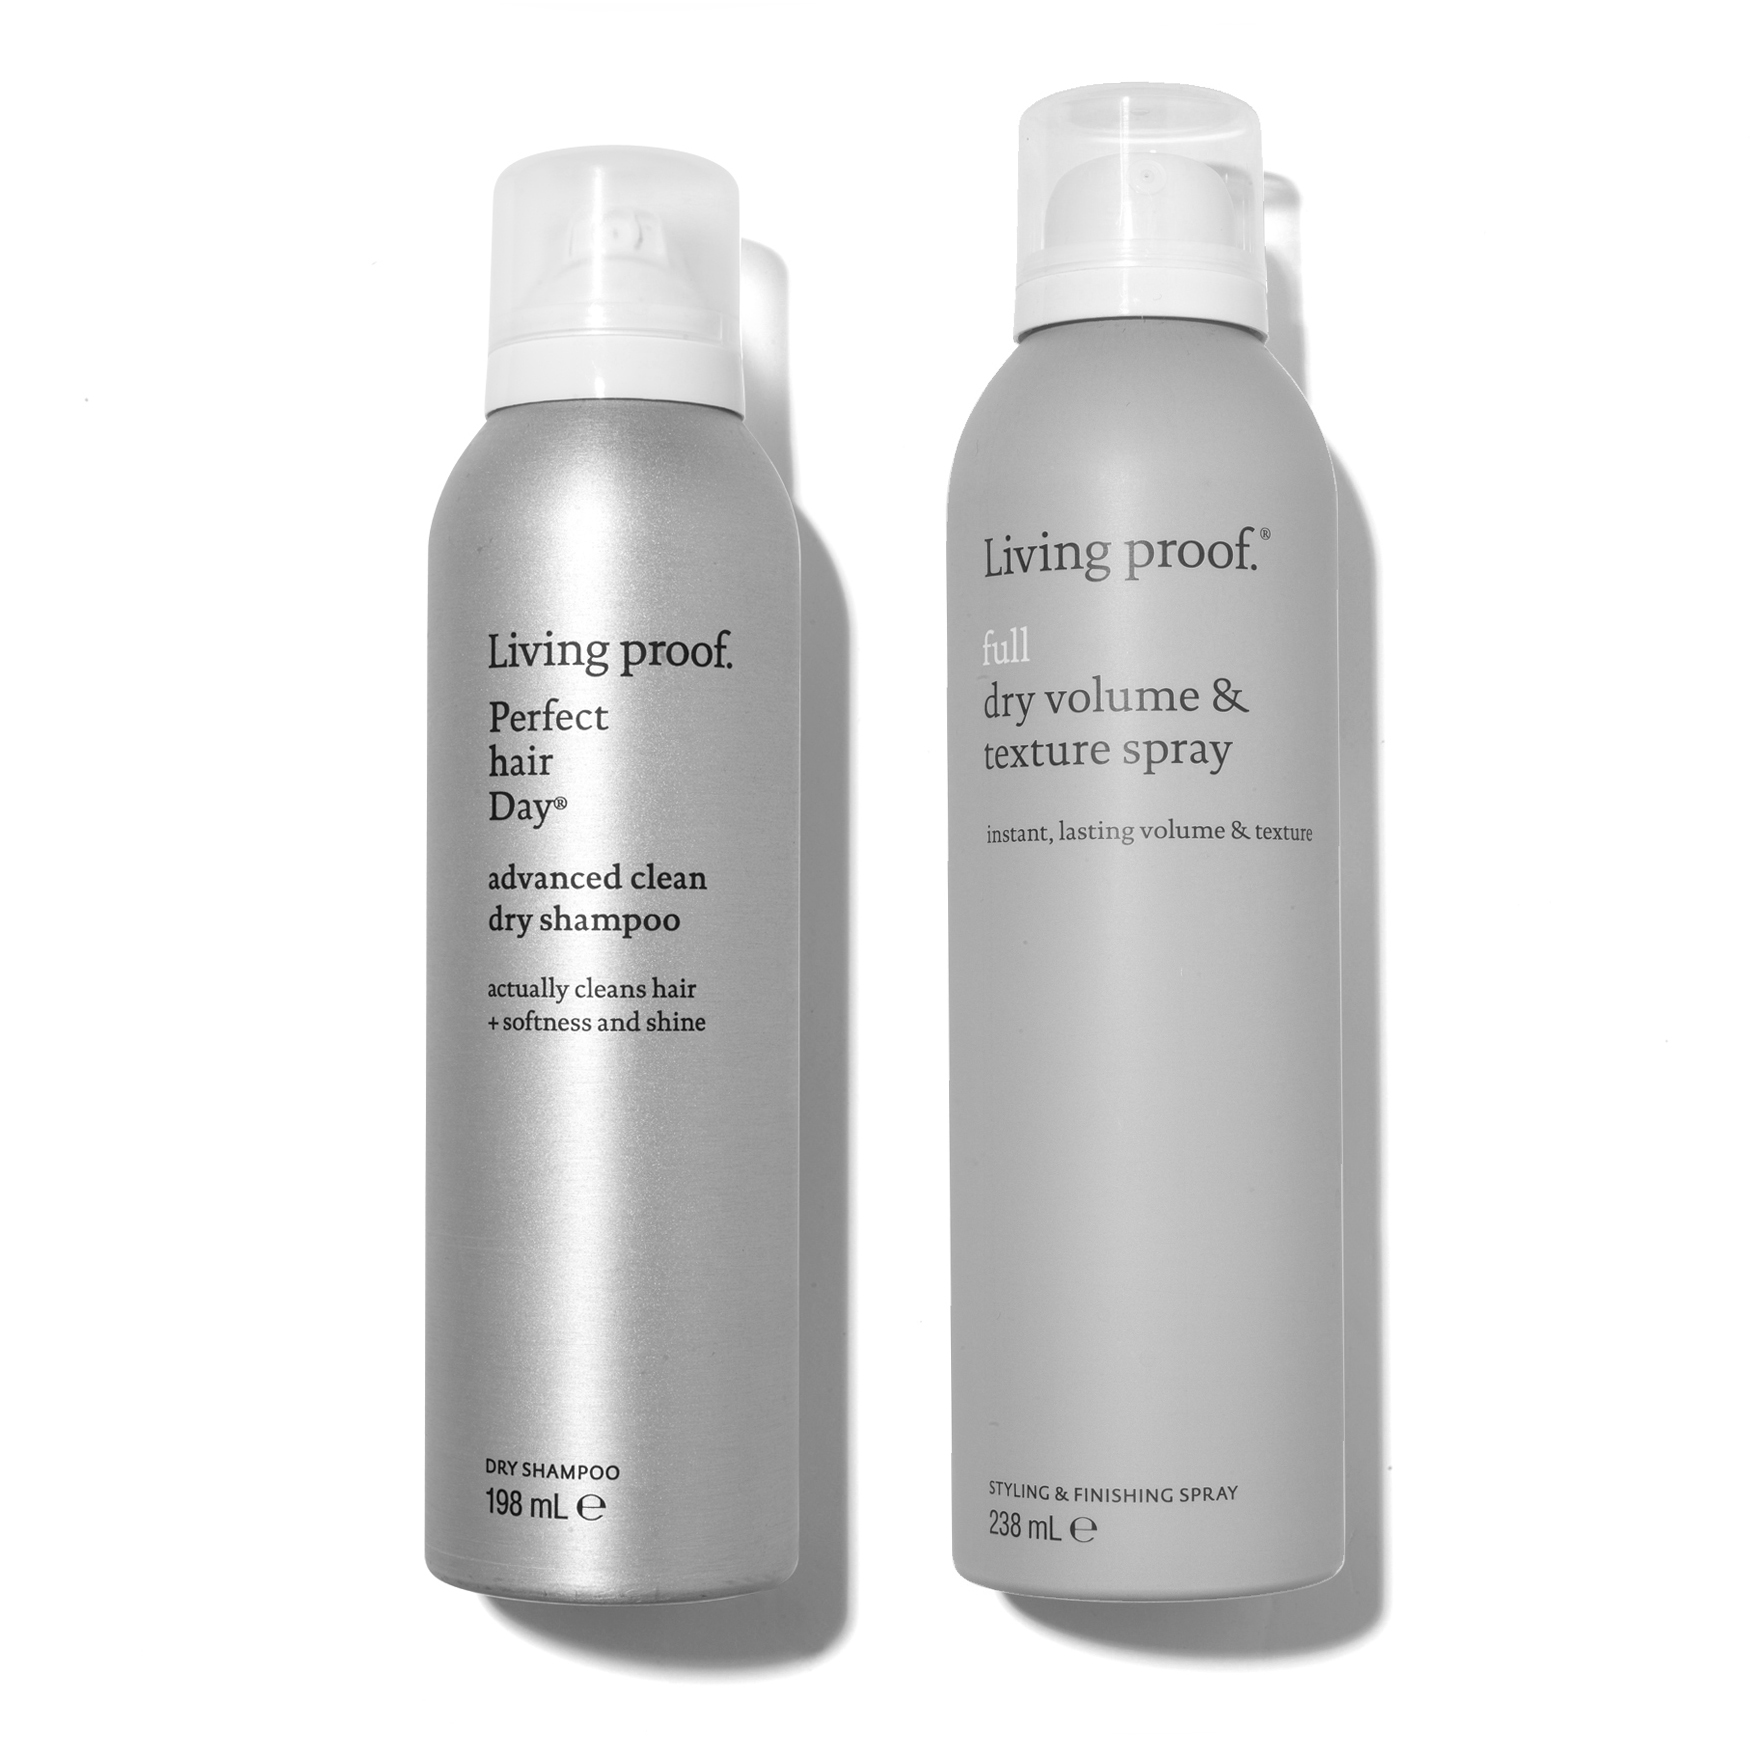 Living Proof Advanced Clean Dry Shampoo and Dry Volume Texture Spray Bundle  | Space NK